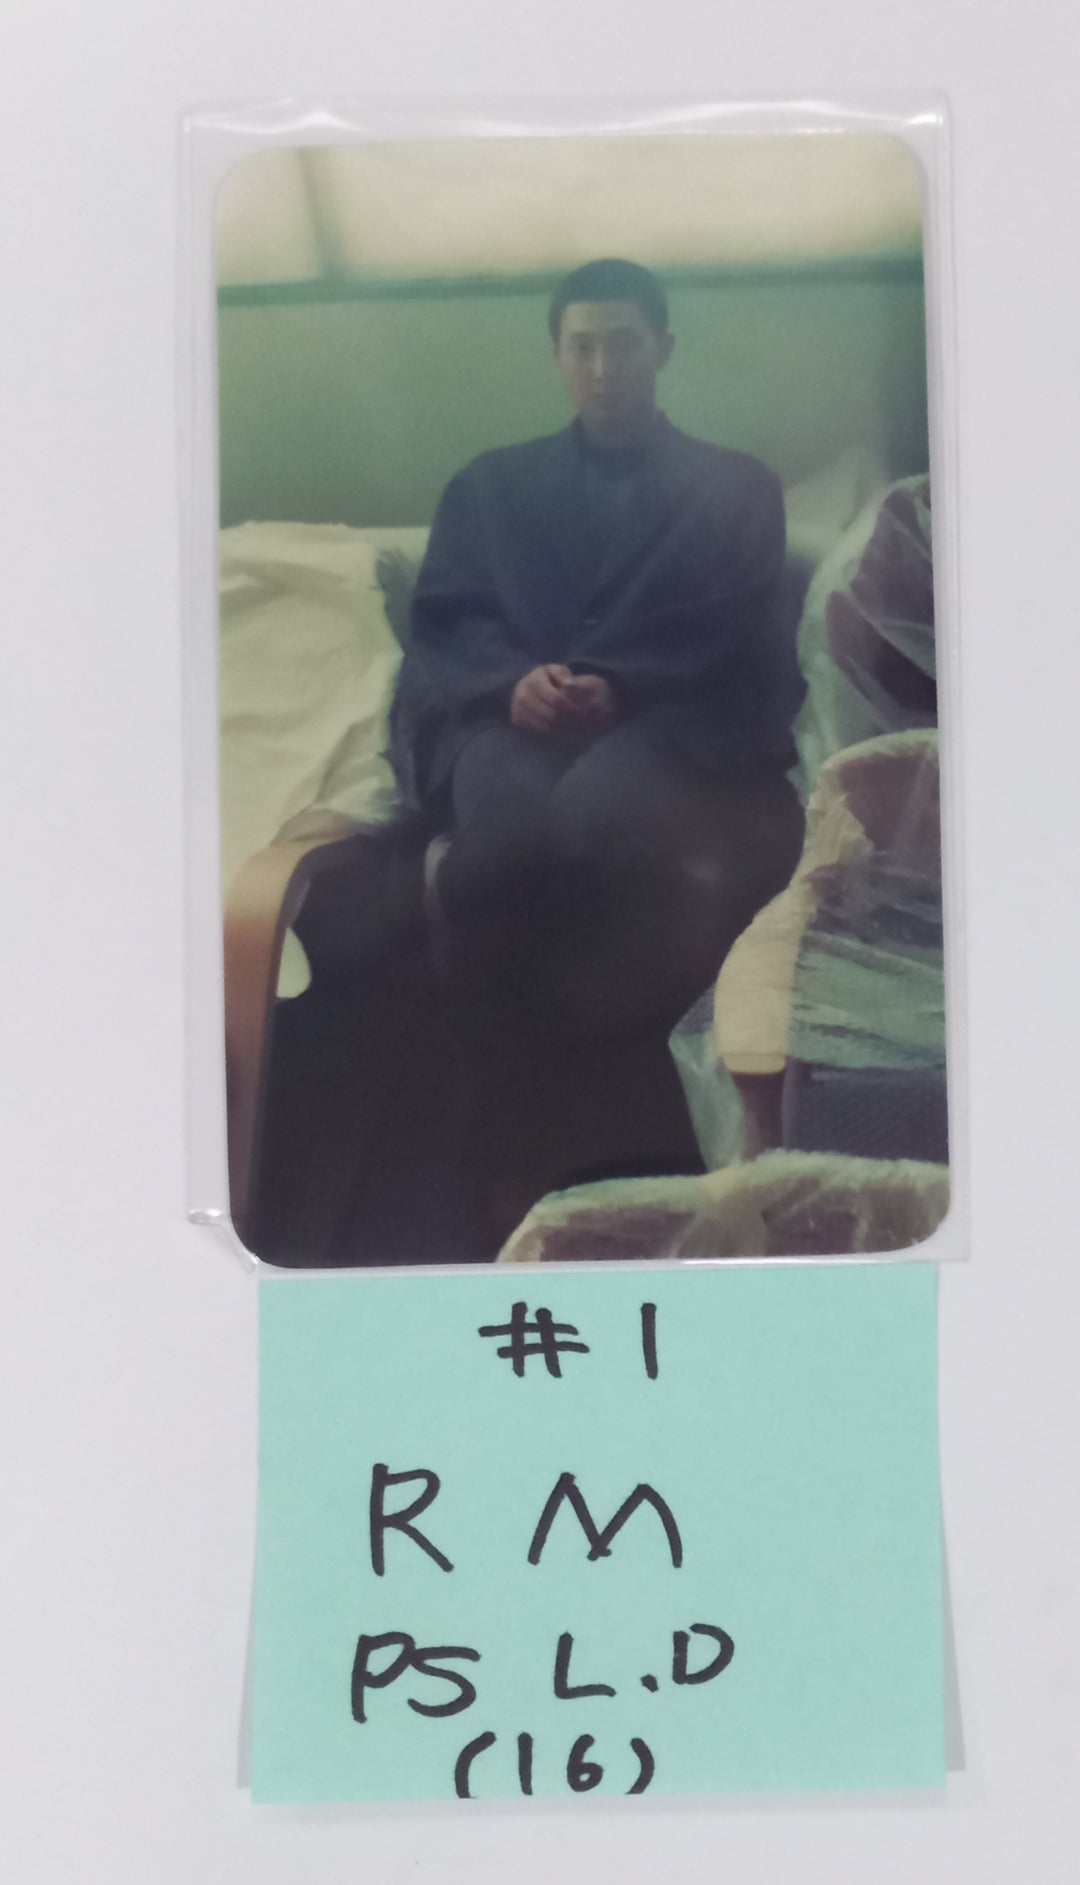 RM "Right Place, Wrong Person" - Powerstation Lucky Draw Event Photocard [24.5.28]